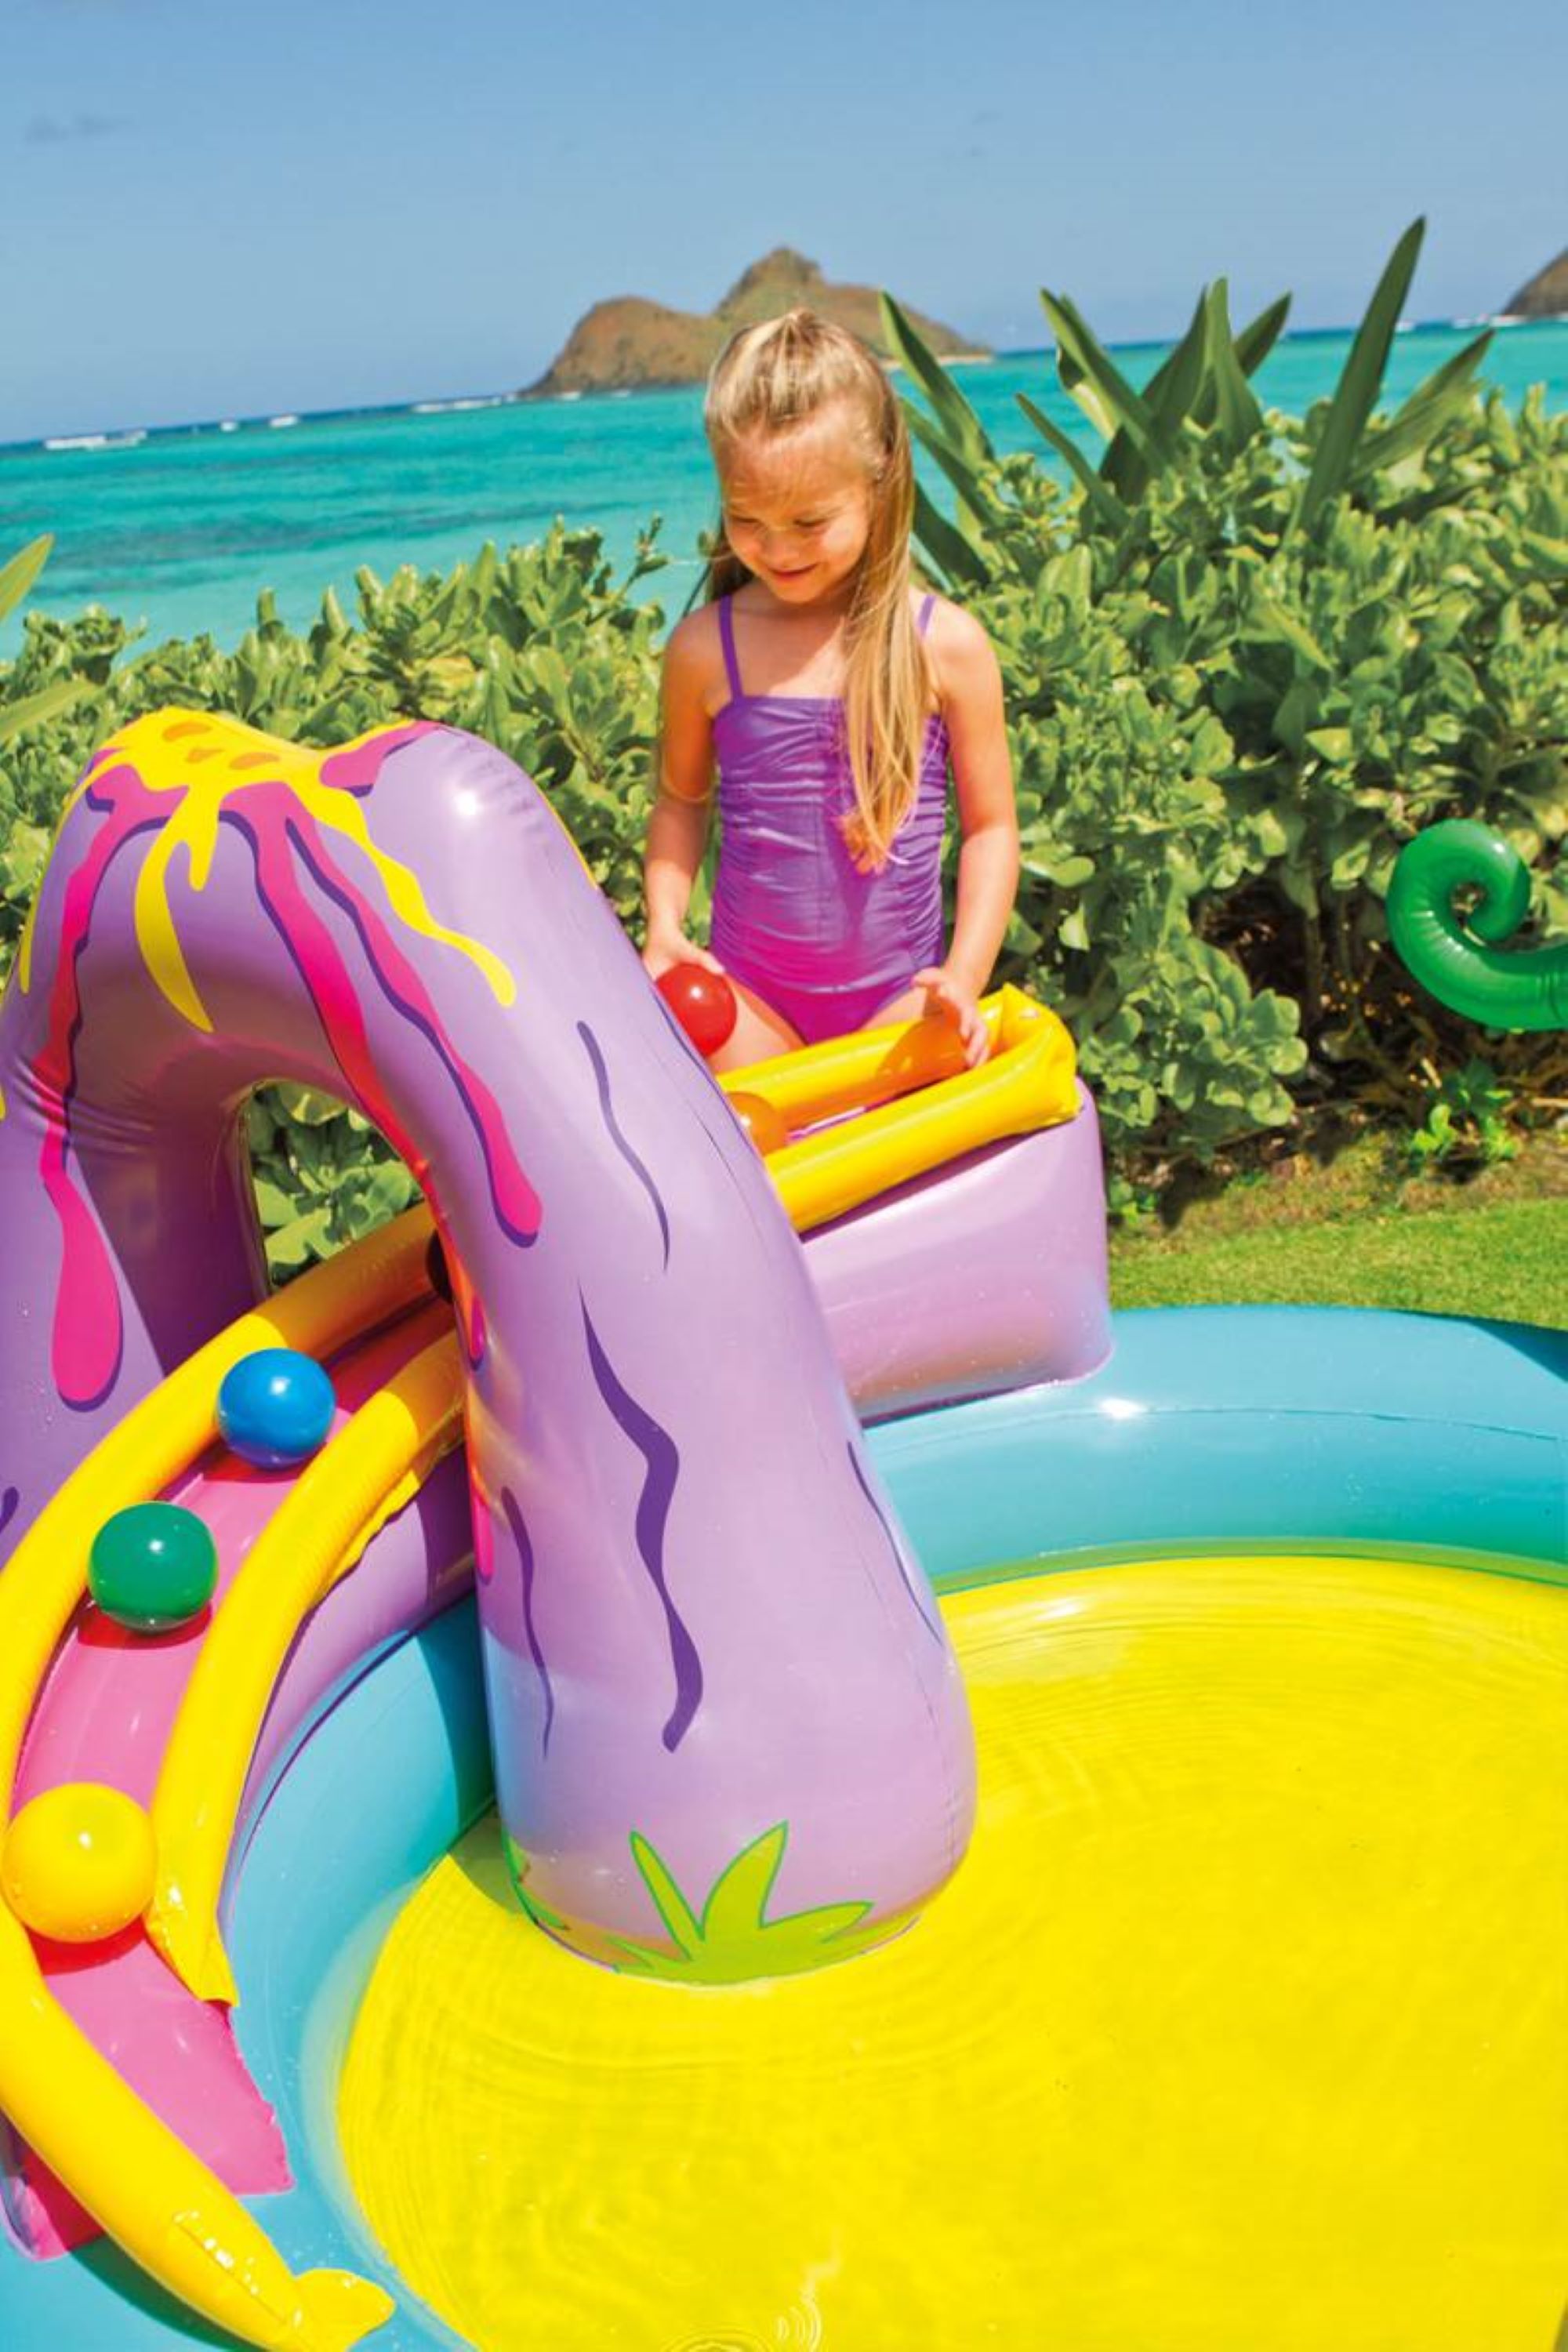 Intex 11ft x 7.5ft x 44in Dinoland Play Center Kiddie Inflatable Swimming Pool - image 4 of 6